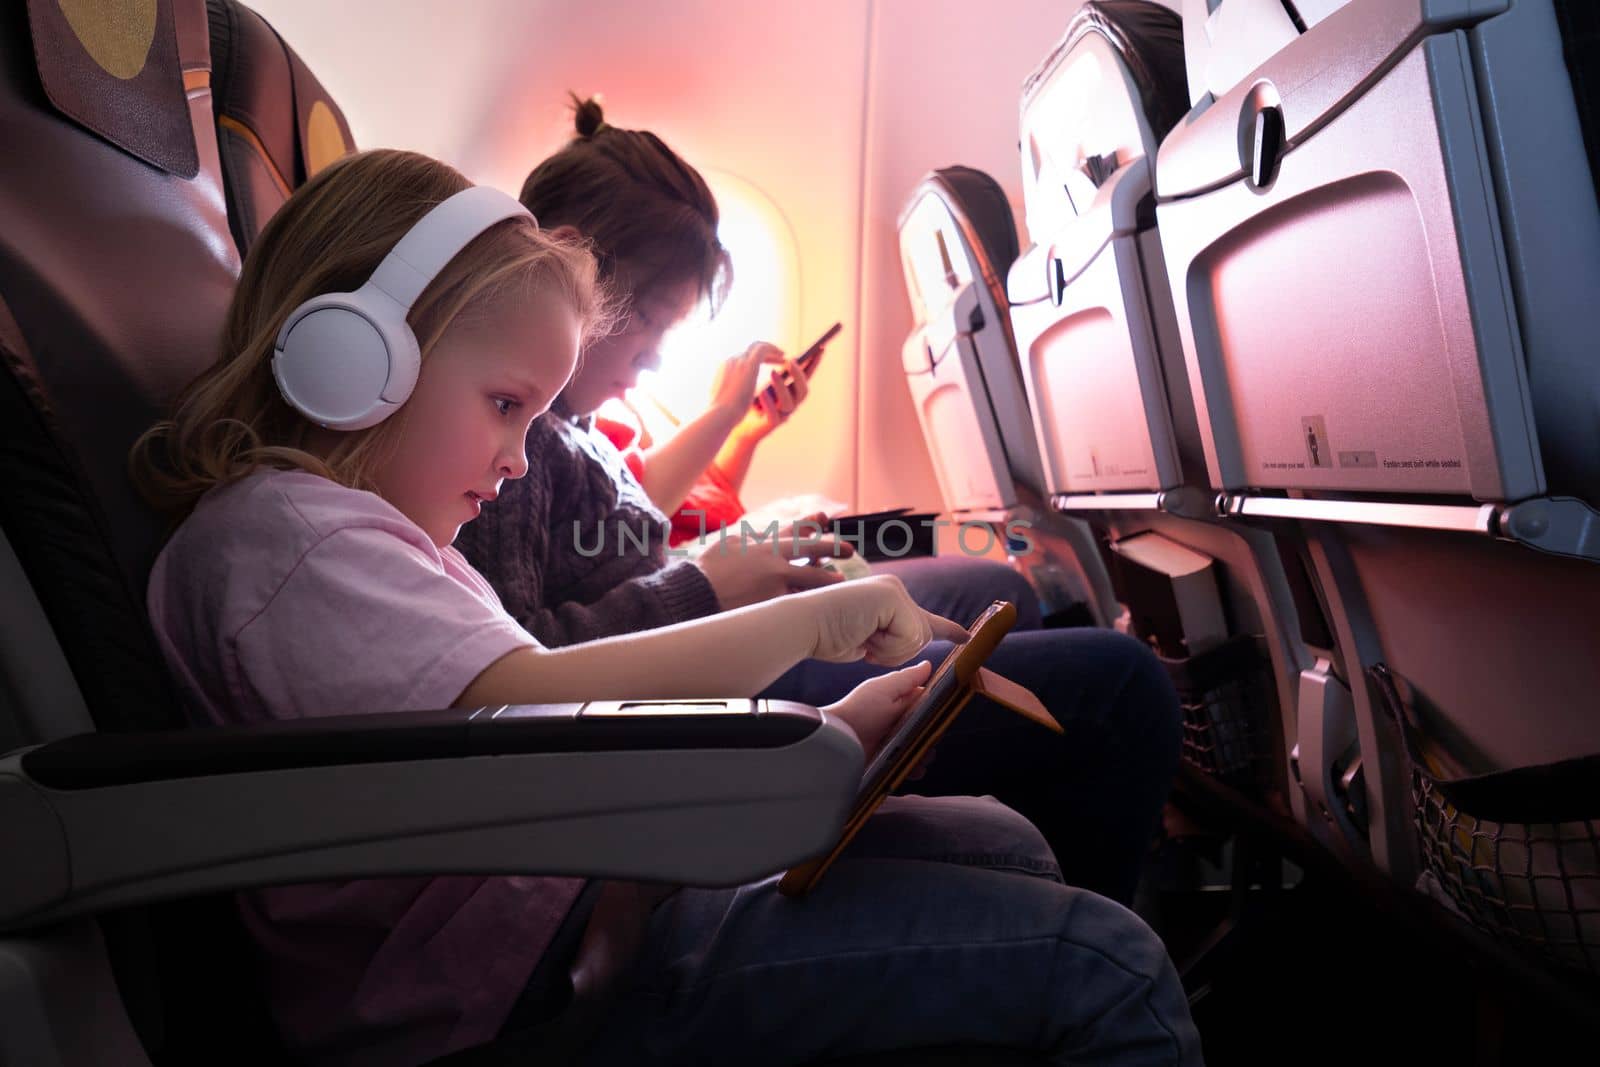 Kids with gadgets in the airplane by gcm